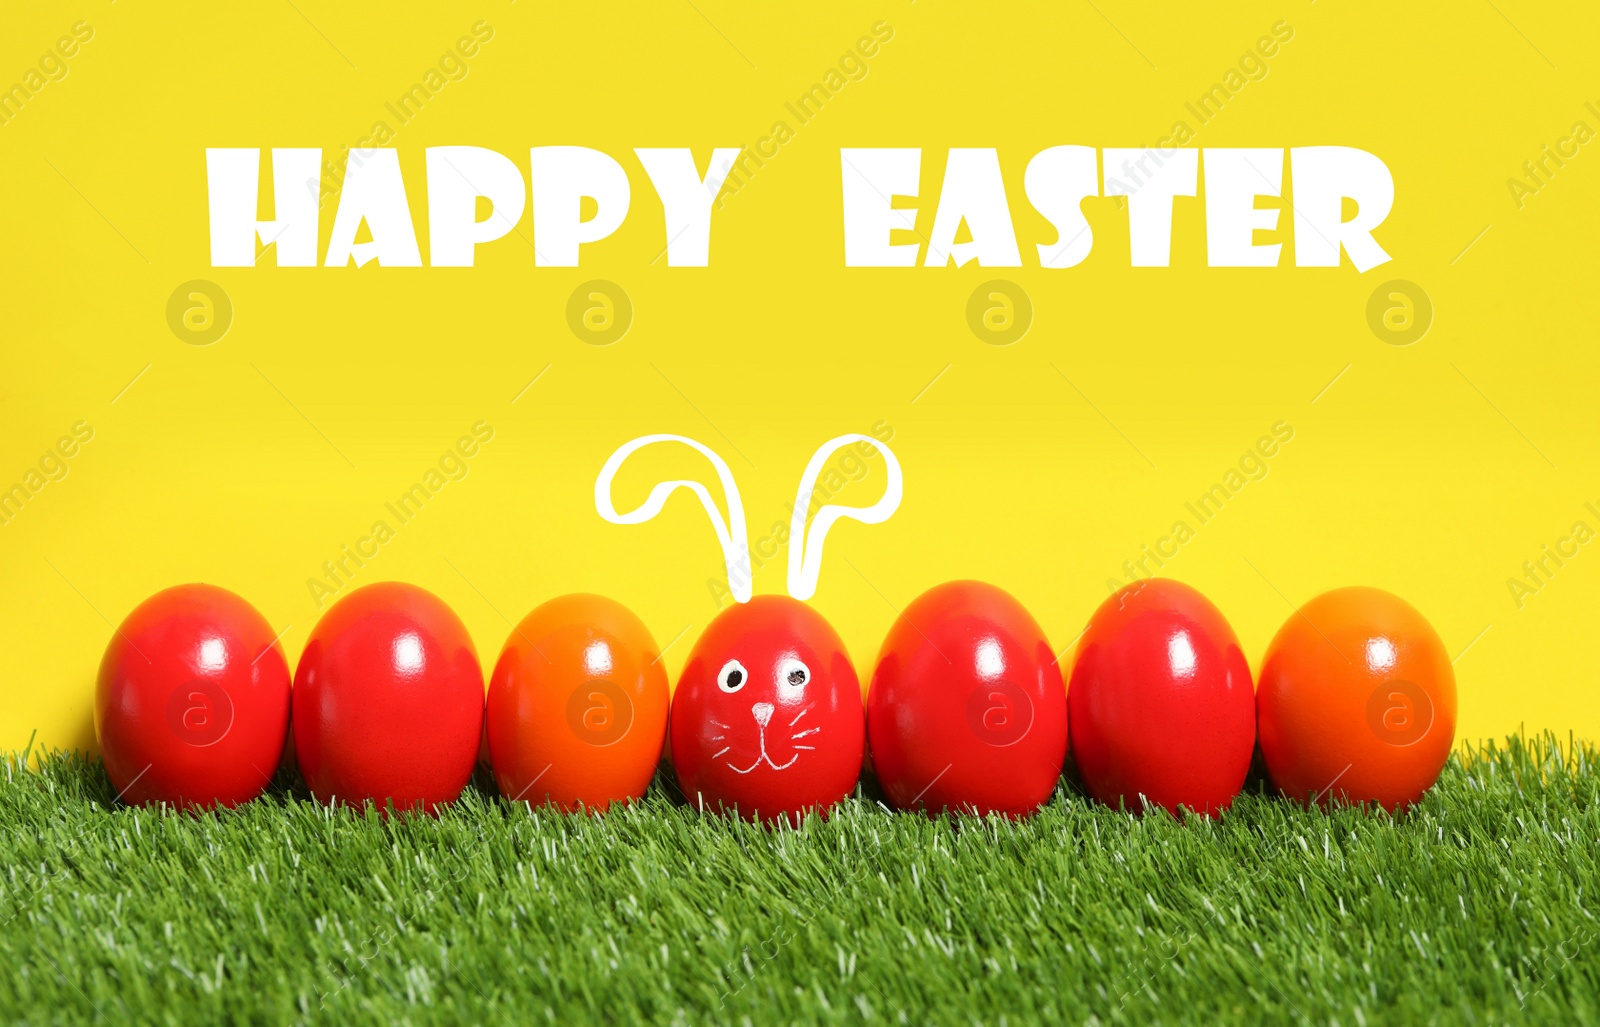 Image of One egg with drawn face and ears as Easter bunny among others on green grass against yellow background